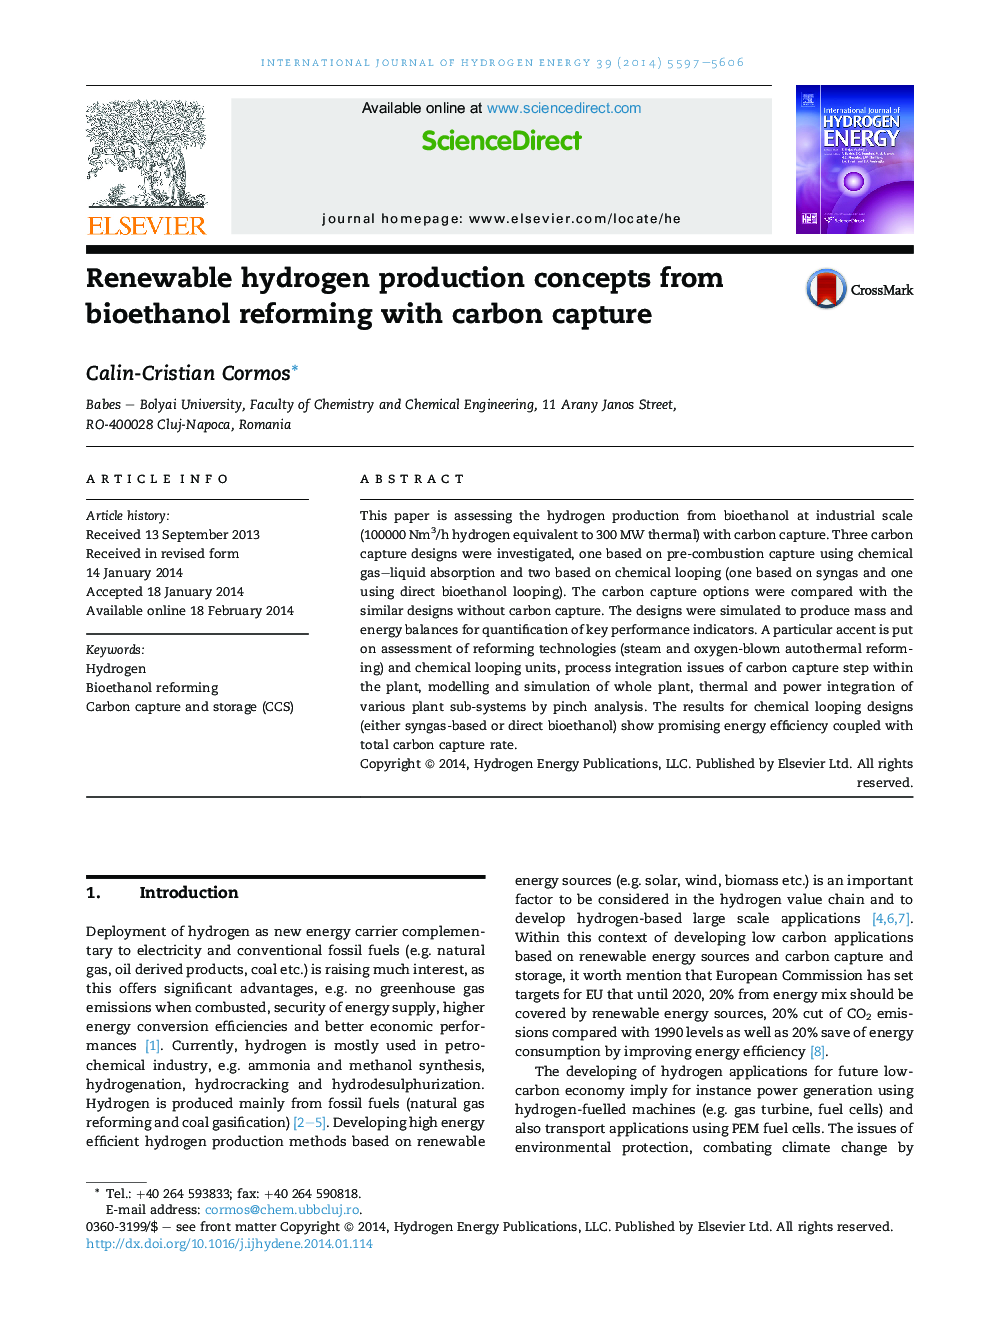 Renewable hydrogen production concepts from bioethanol reforming with carbon capture